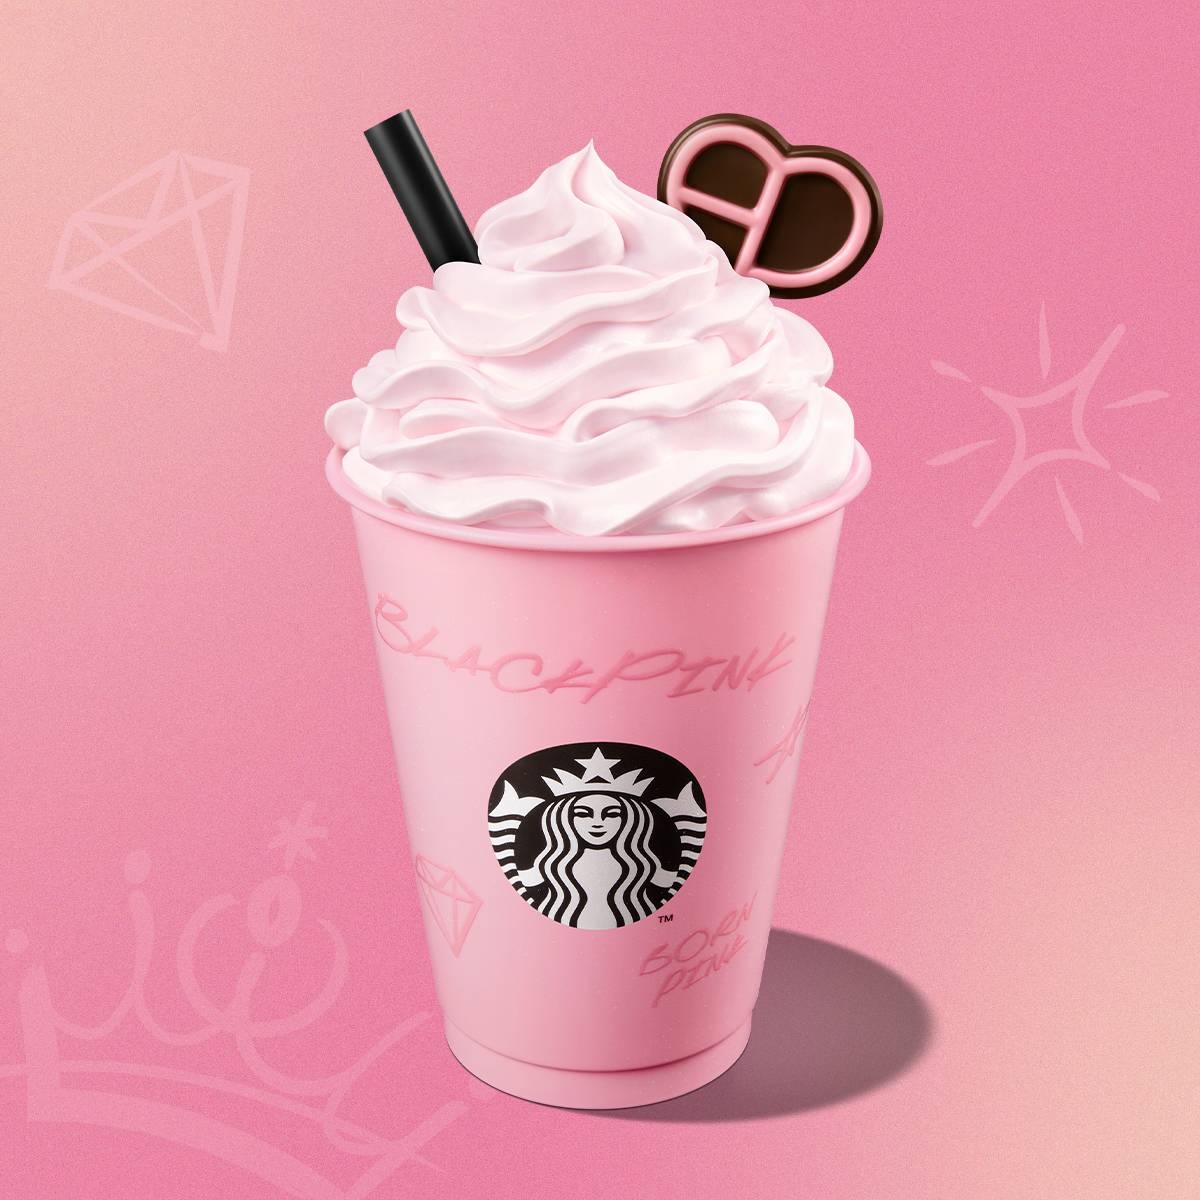 The new Blackpink Strawberry Choco Cream Frappuccino Blended Beverage 